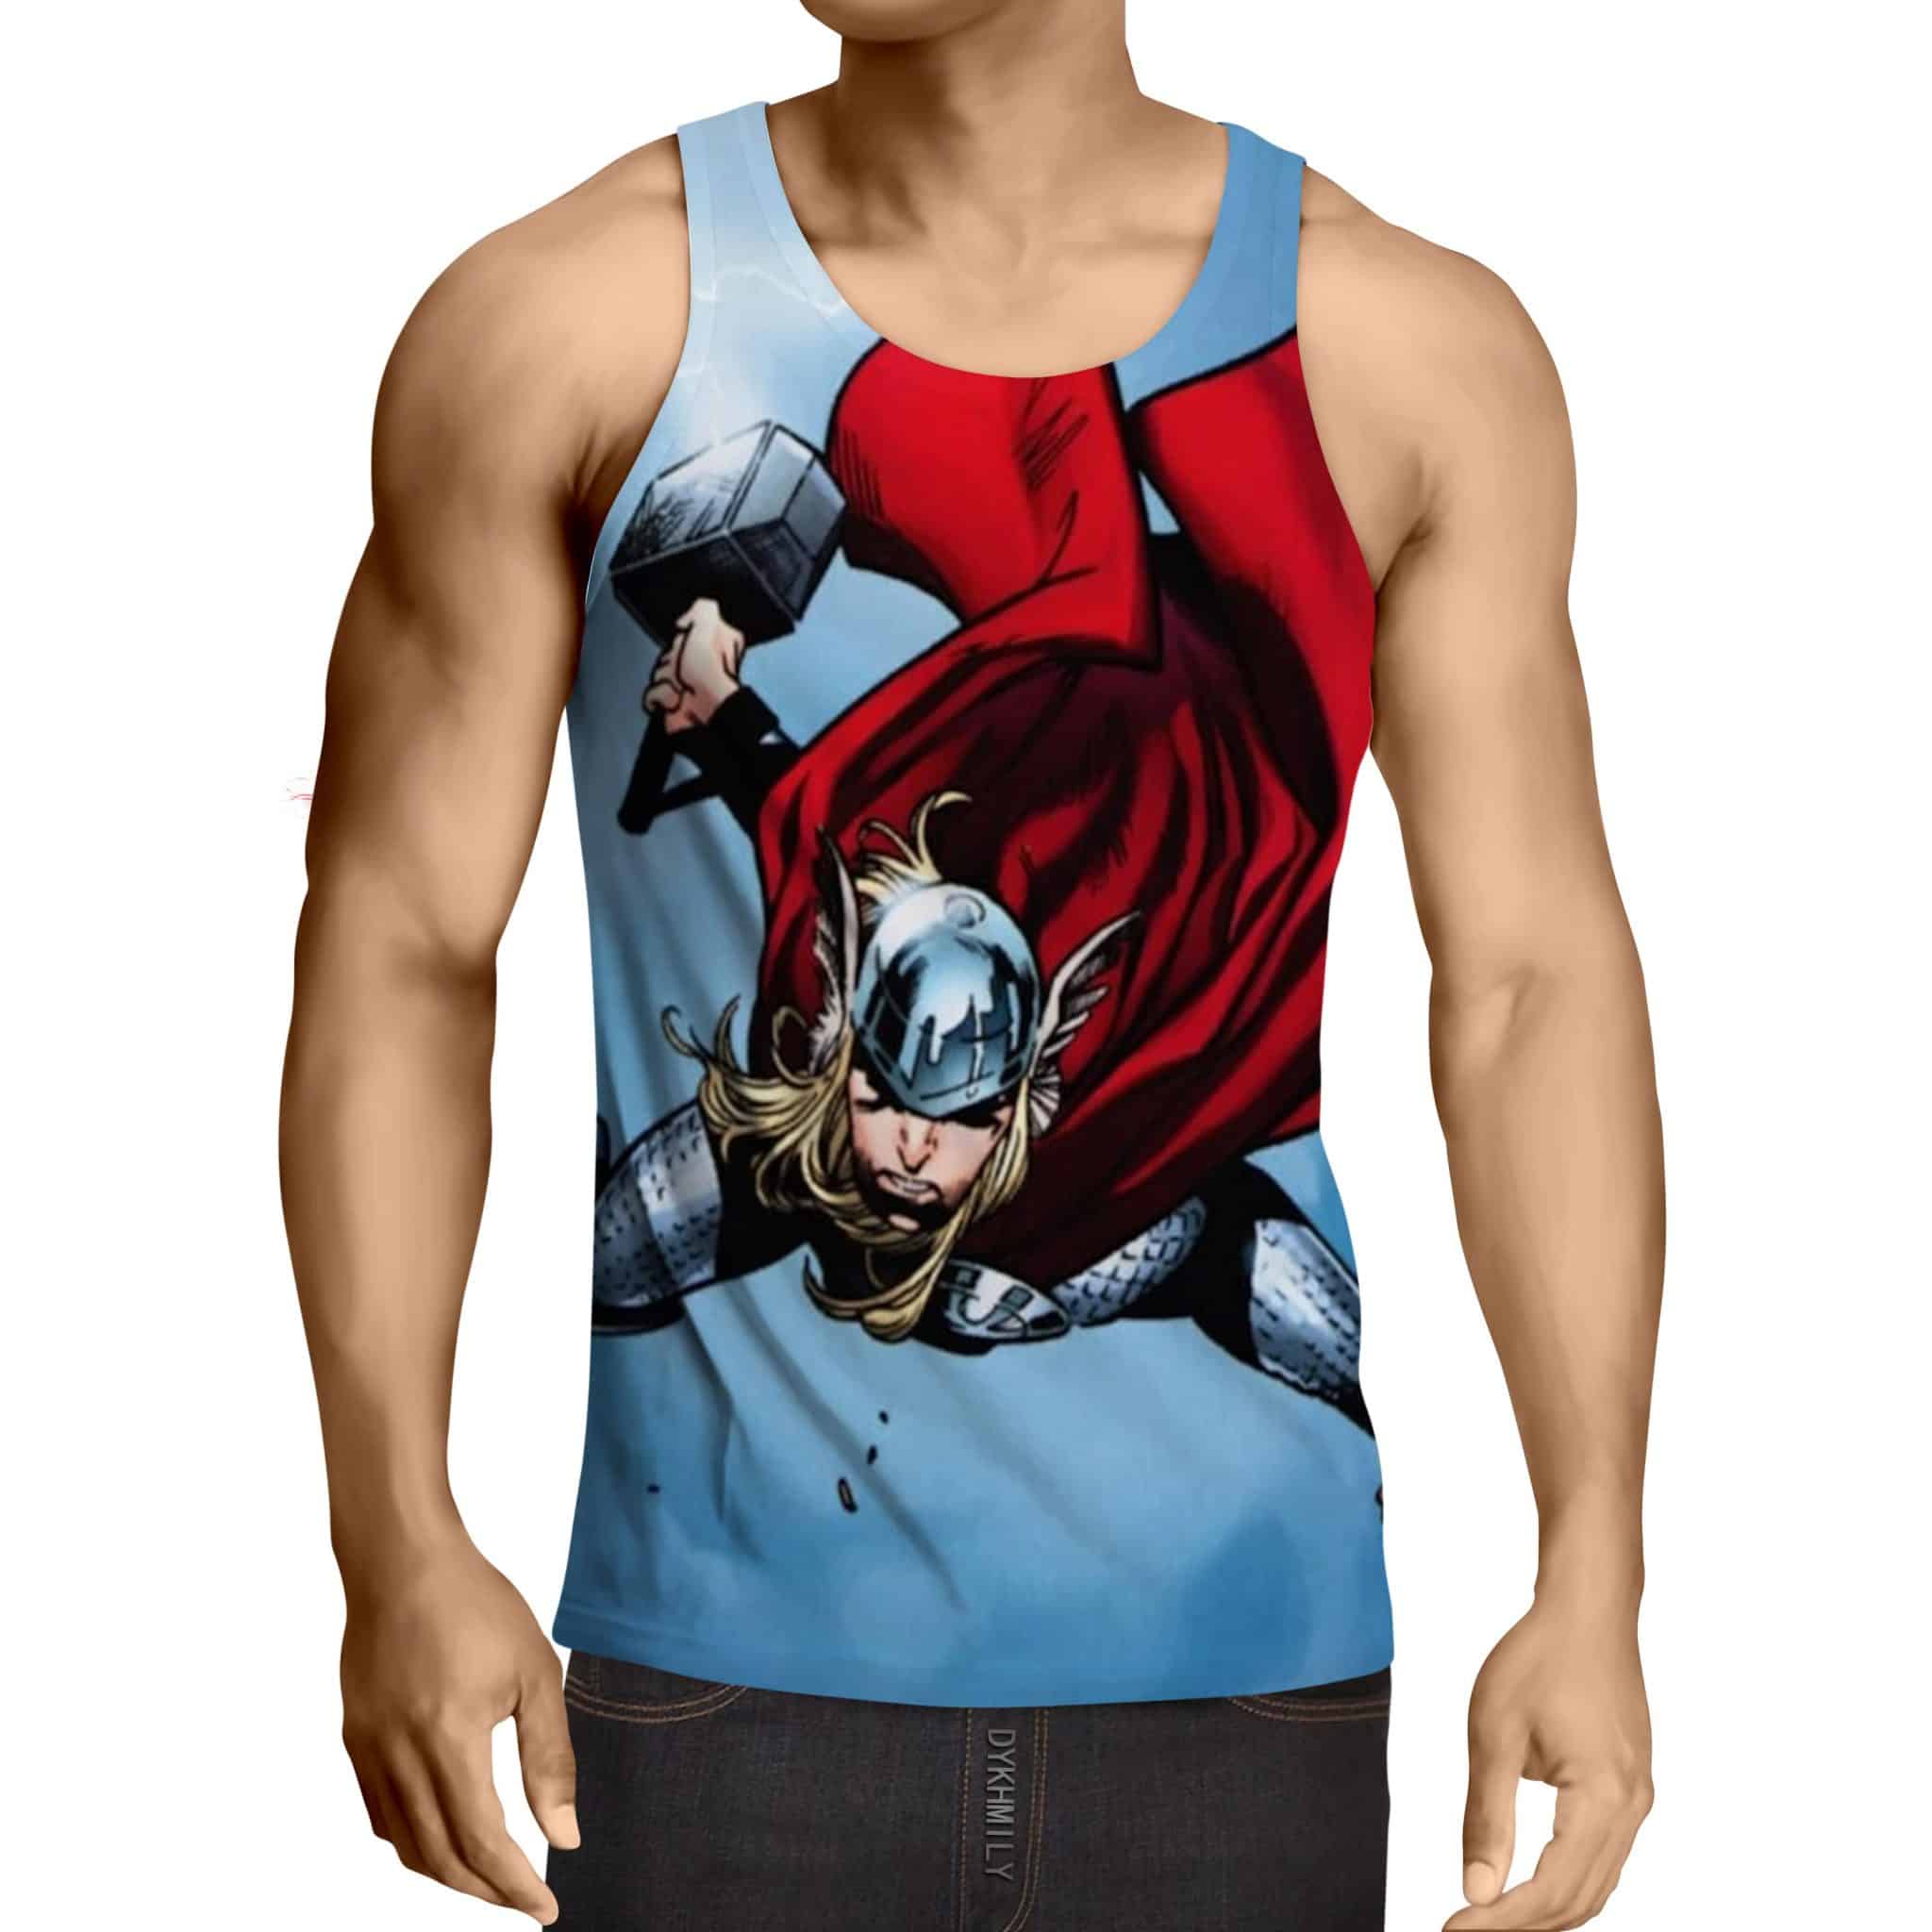 Thor Cartoon Flying Holding Hammer On Fight Amazing Tank Top - Superheroes  Gears